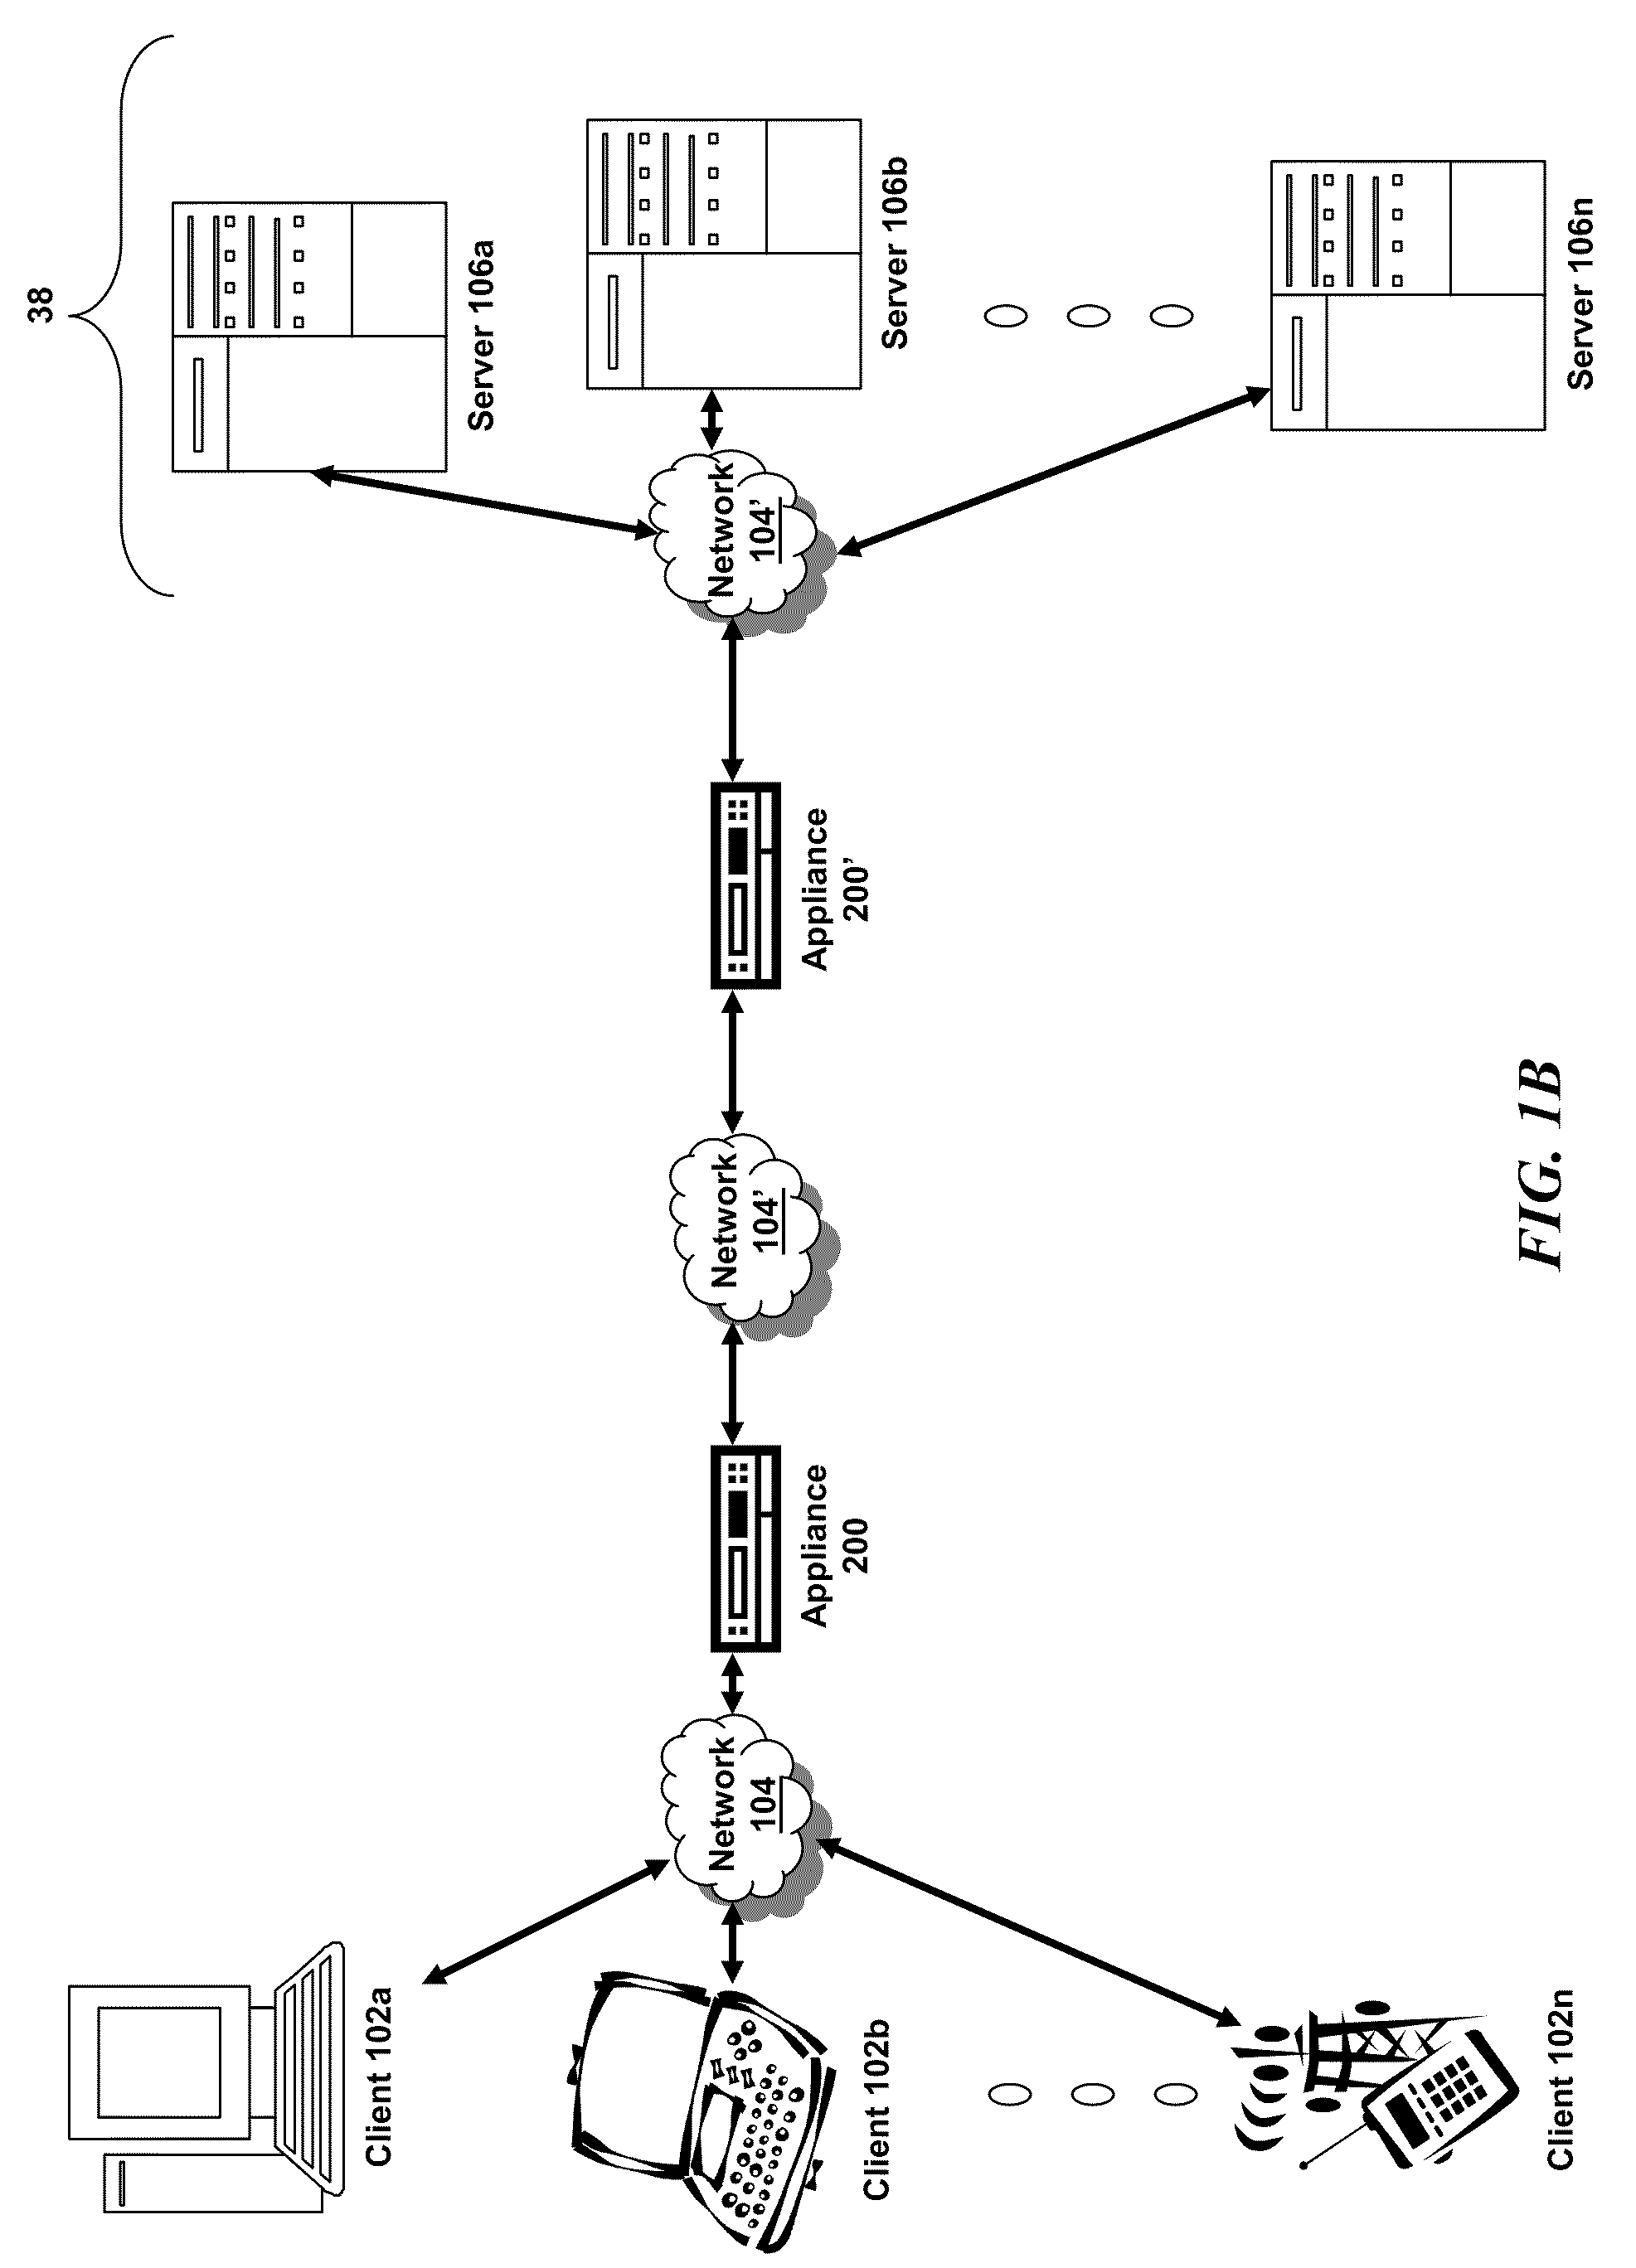 Systems and methods for managing spillover limits in a multi-core system